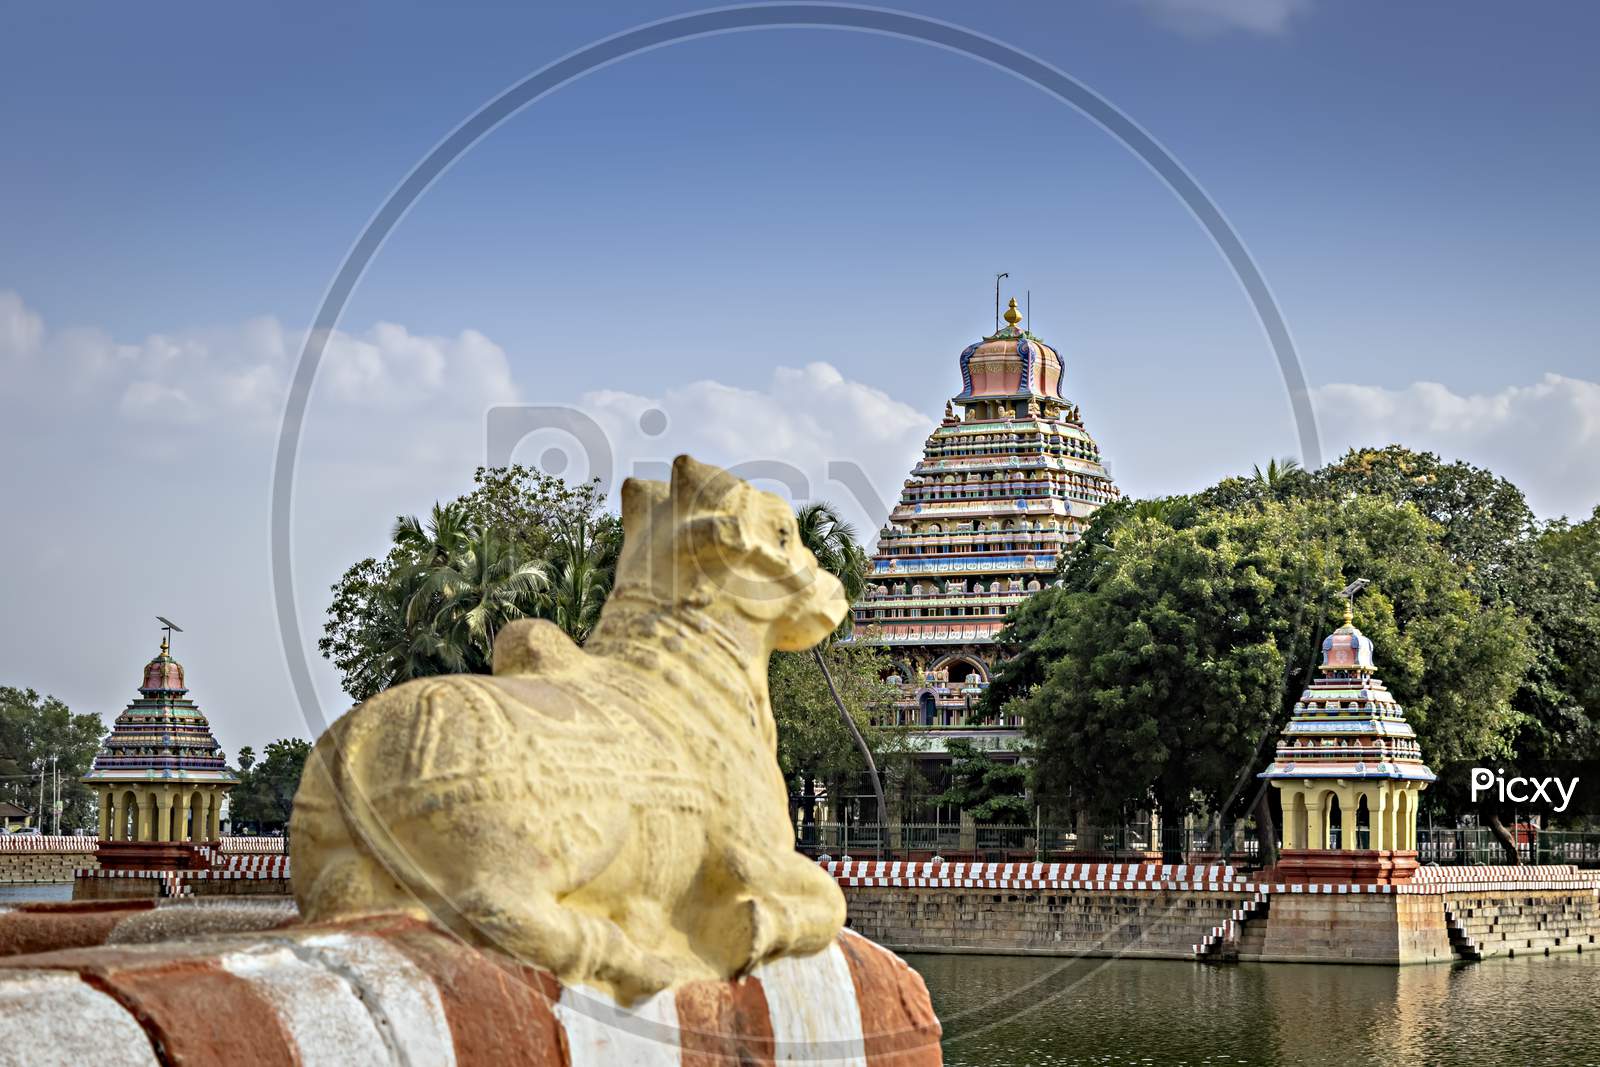 Vandiyur Mariamman Temple With Nandi In Front Located Inside A Lake In Madurai, India.